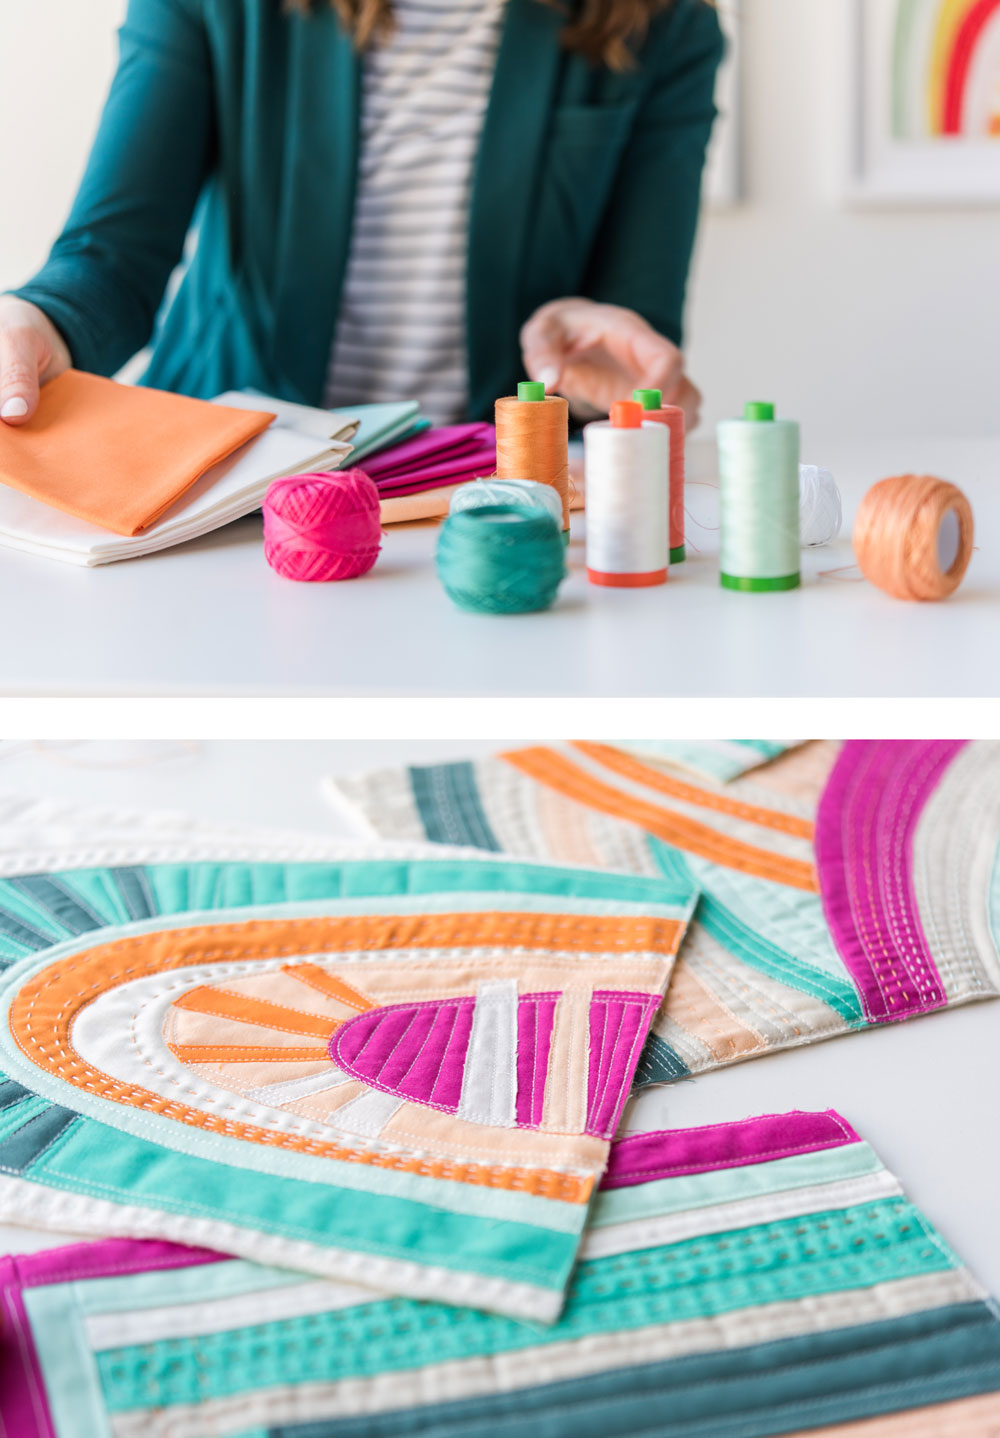 3 Strategies to Get Out of a Sewing Rut! Inspire your creativity for sewing! Suzy Quilts - https://suzyquilts.com/3-strategies-to-get-out-of-a-sewing-rut/